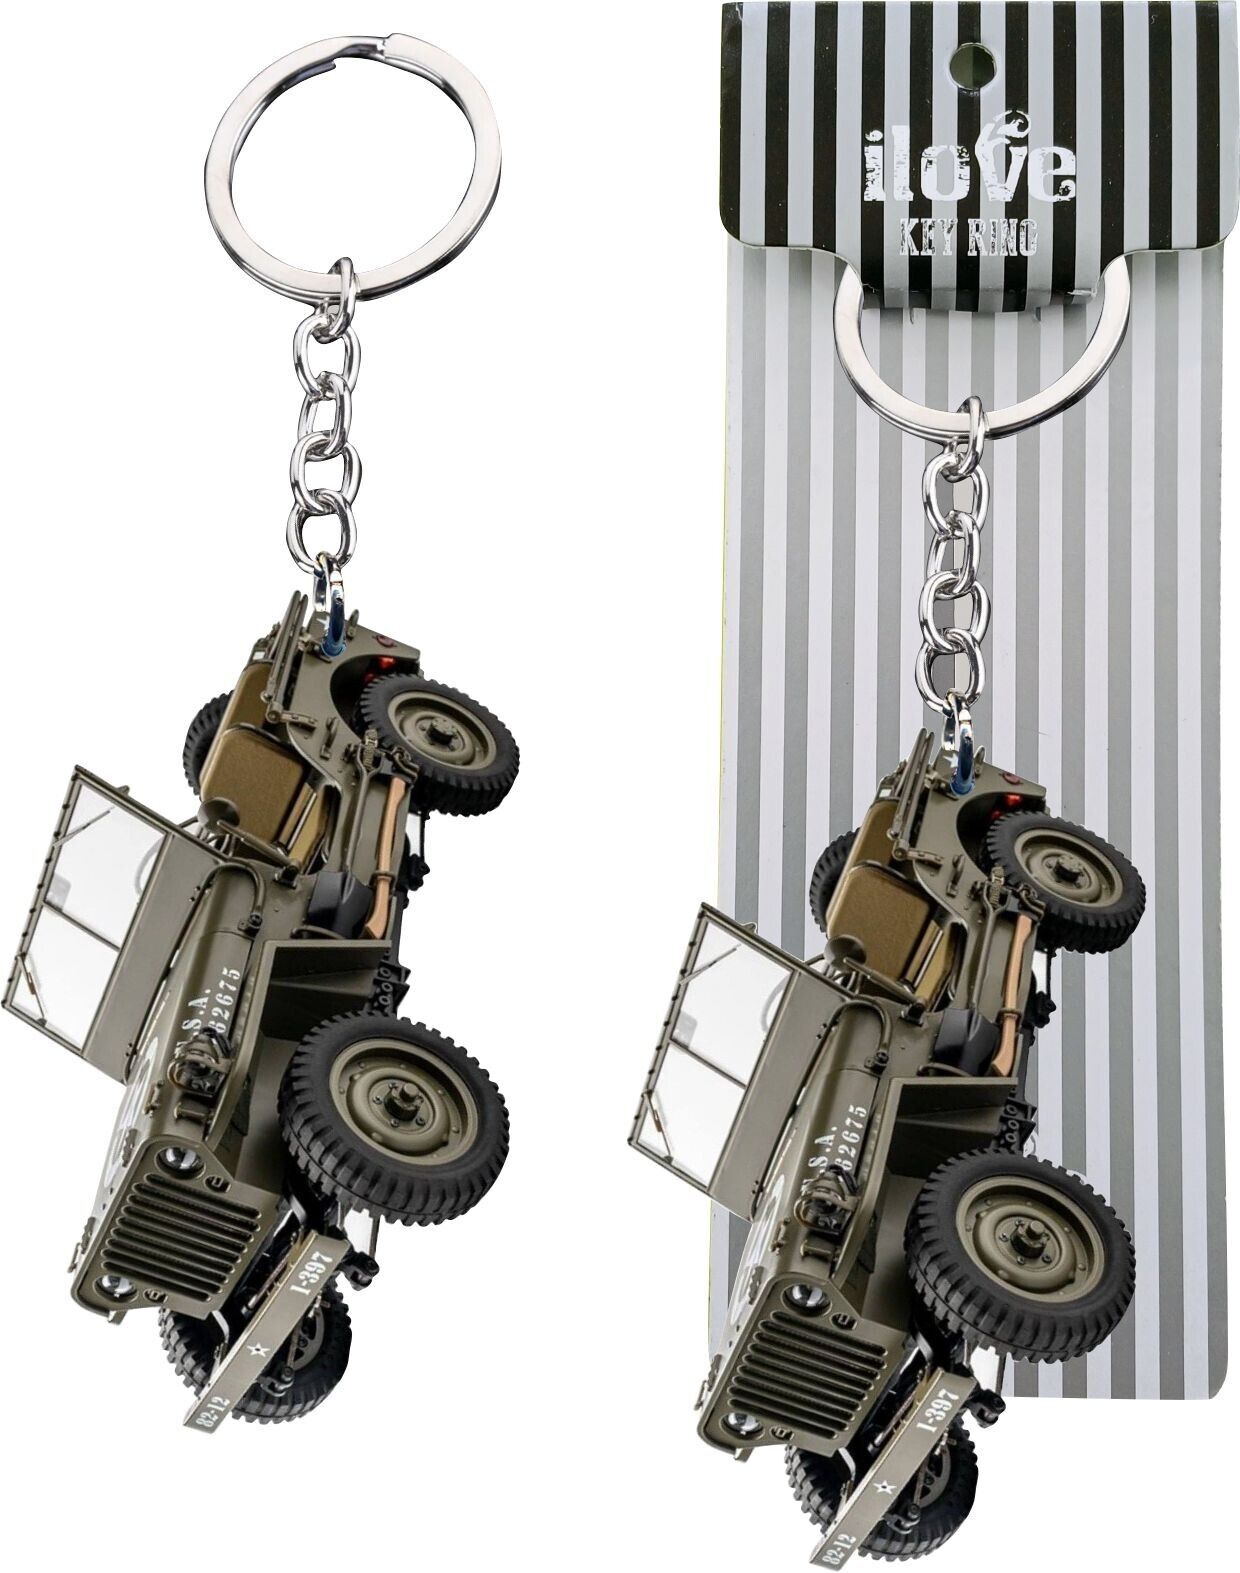 Keyring Miniature Willys MB JEEP USA Key Ring Automobile Gift